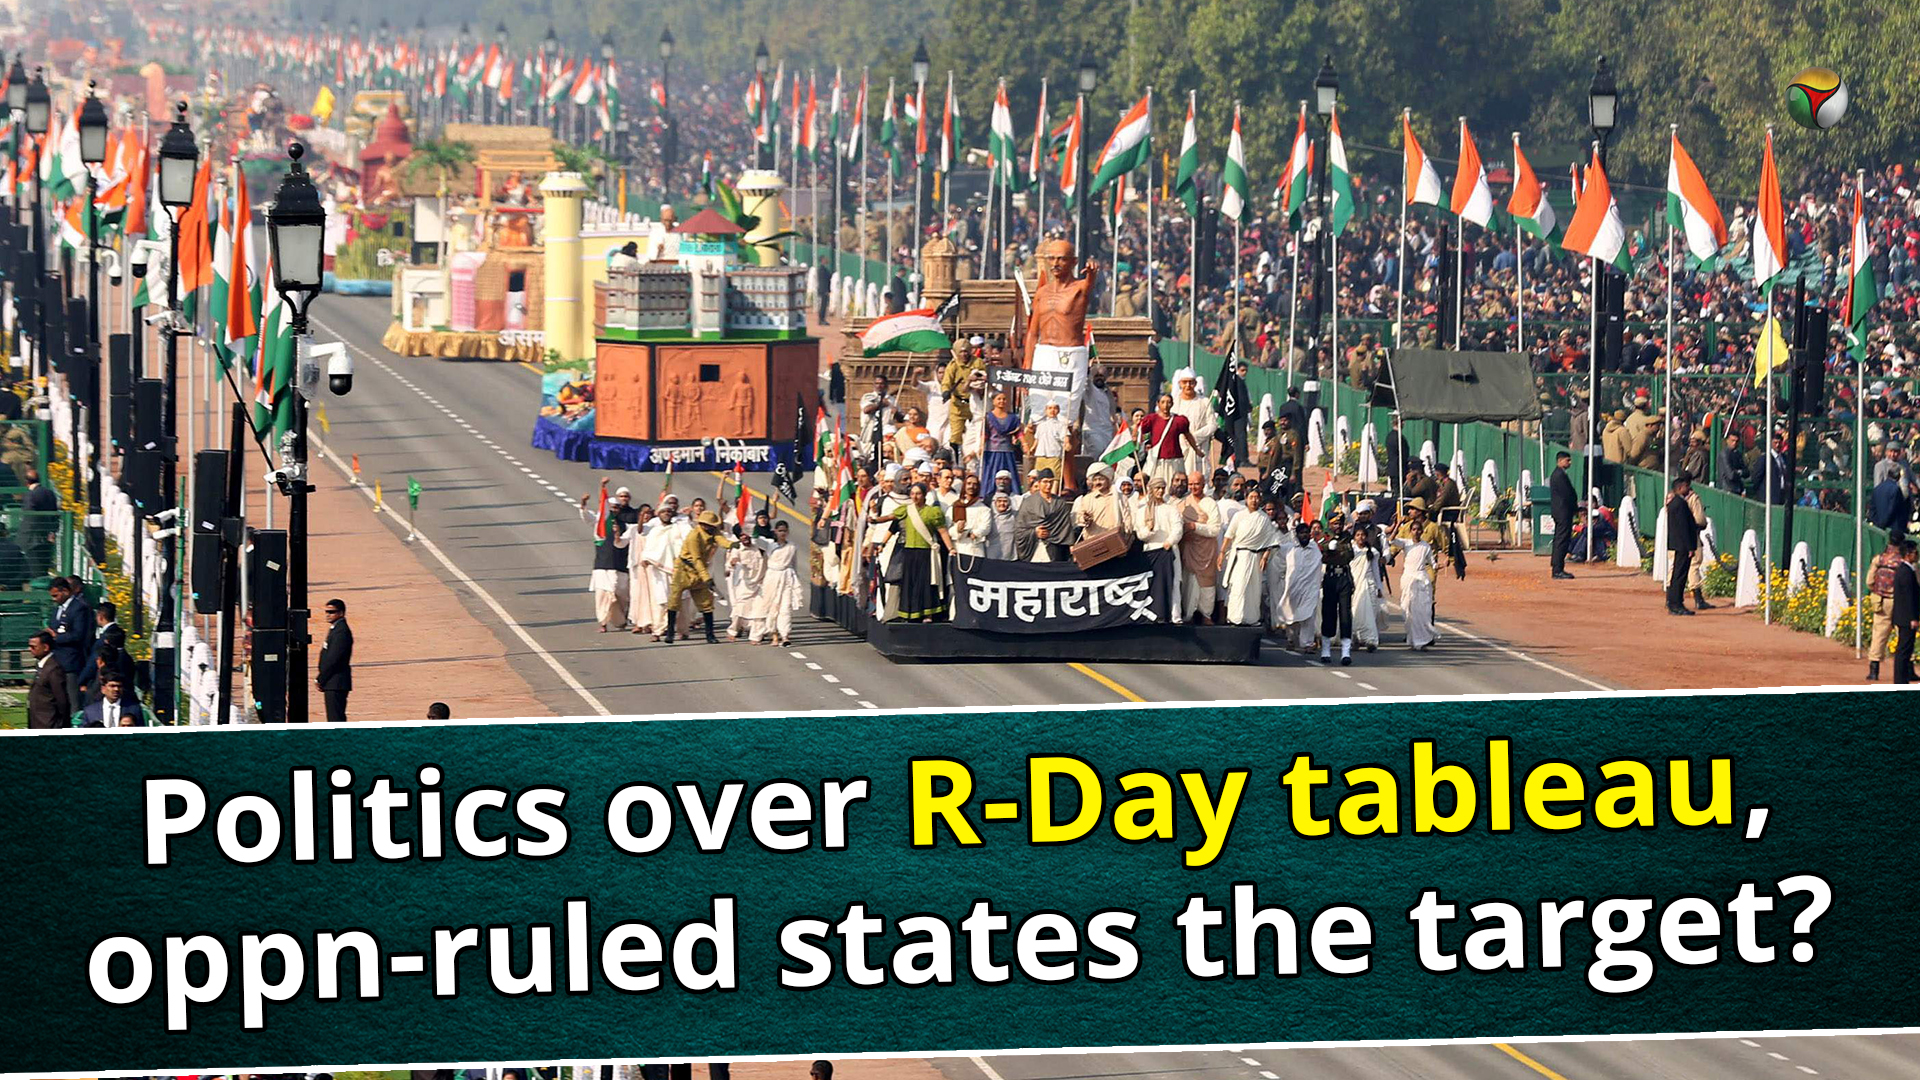 Politics over R-Day tableau, opposition-ruled states the target